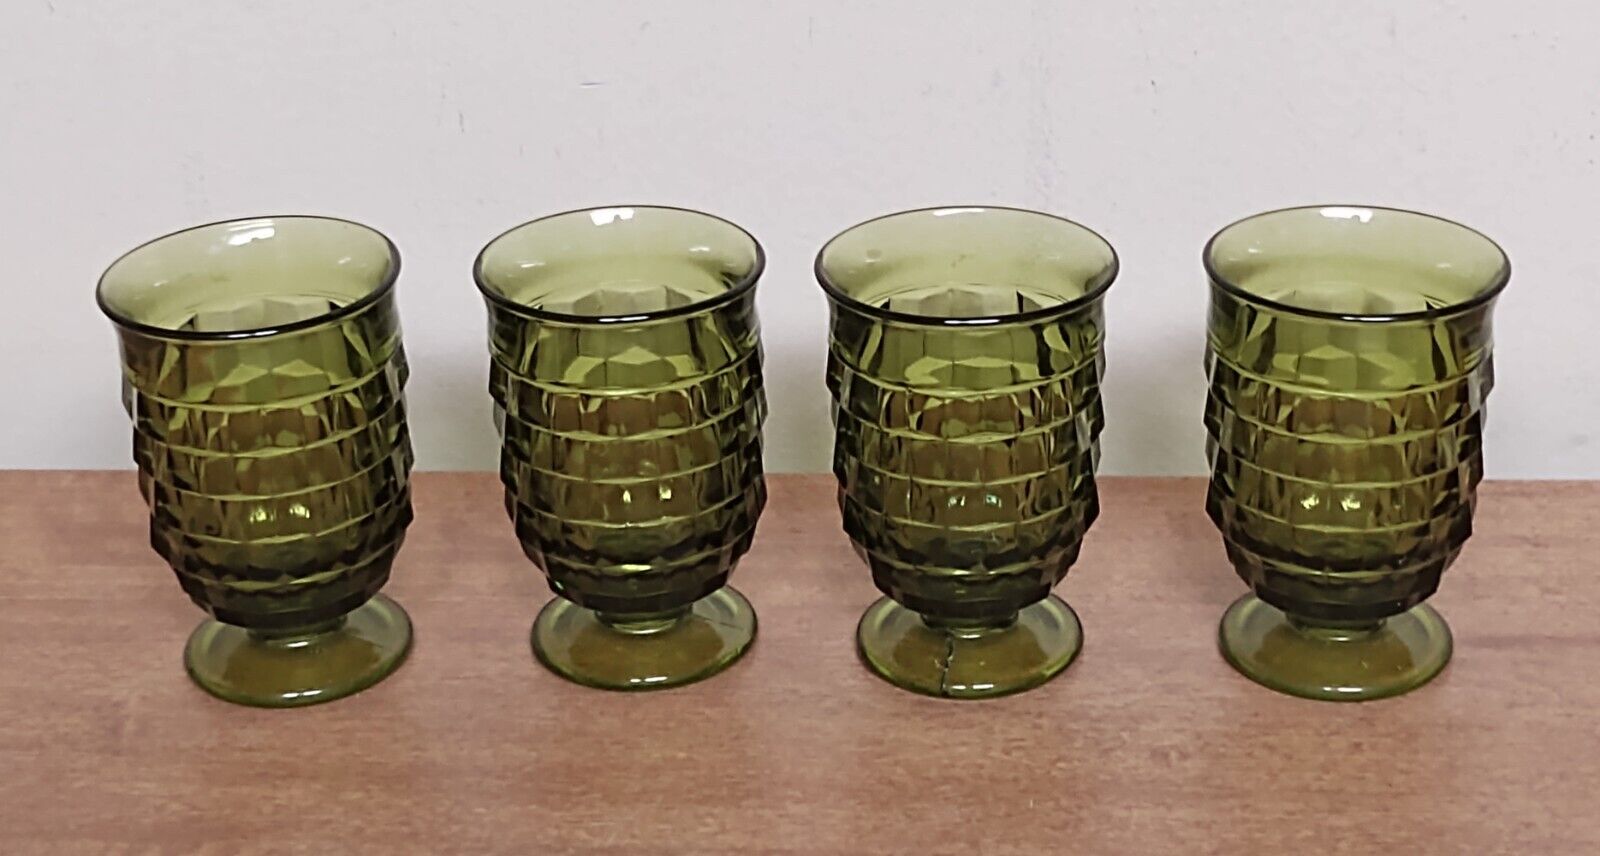 Set of 4 Vtg Whitehall Colony Avocado Green Footed Tumblers Juice Glasses 5oz